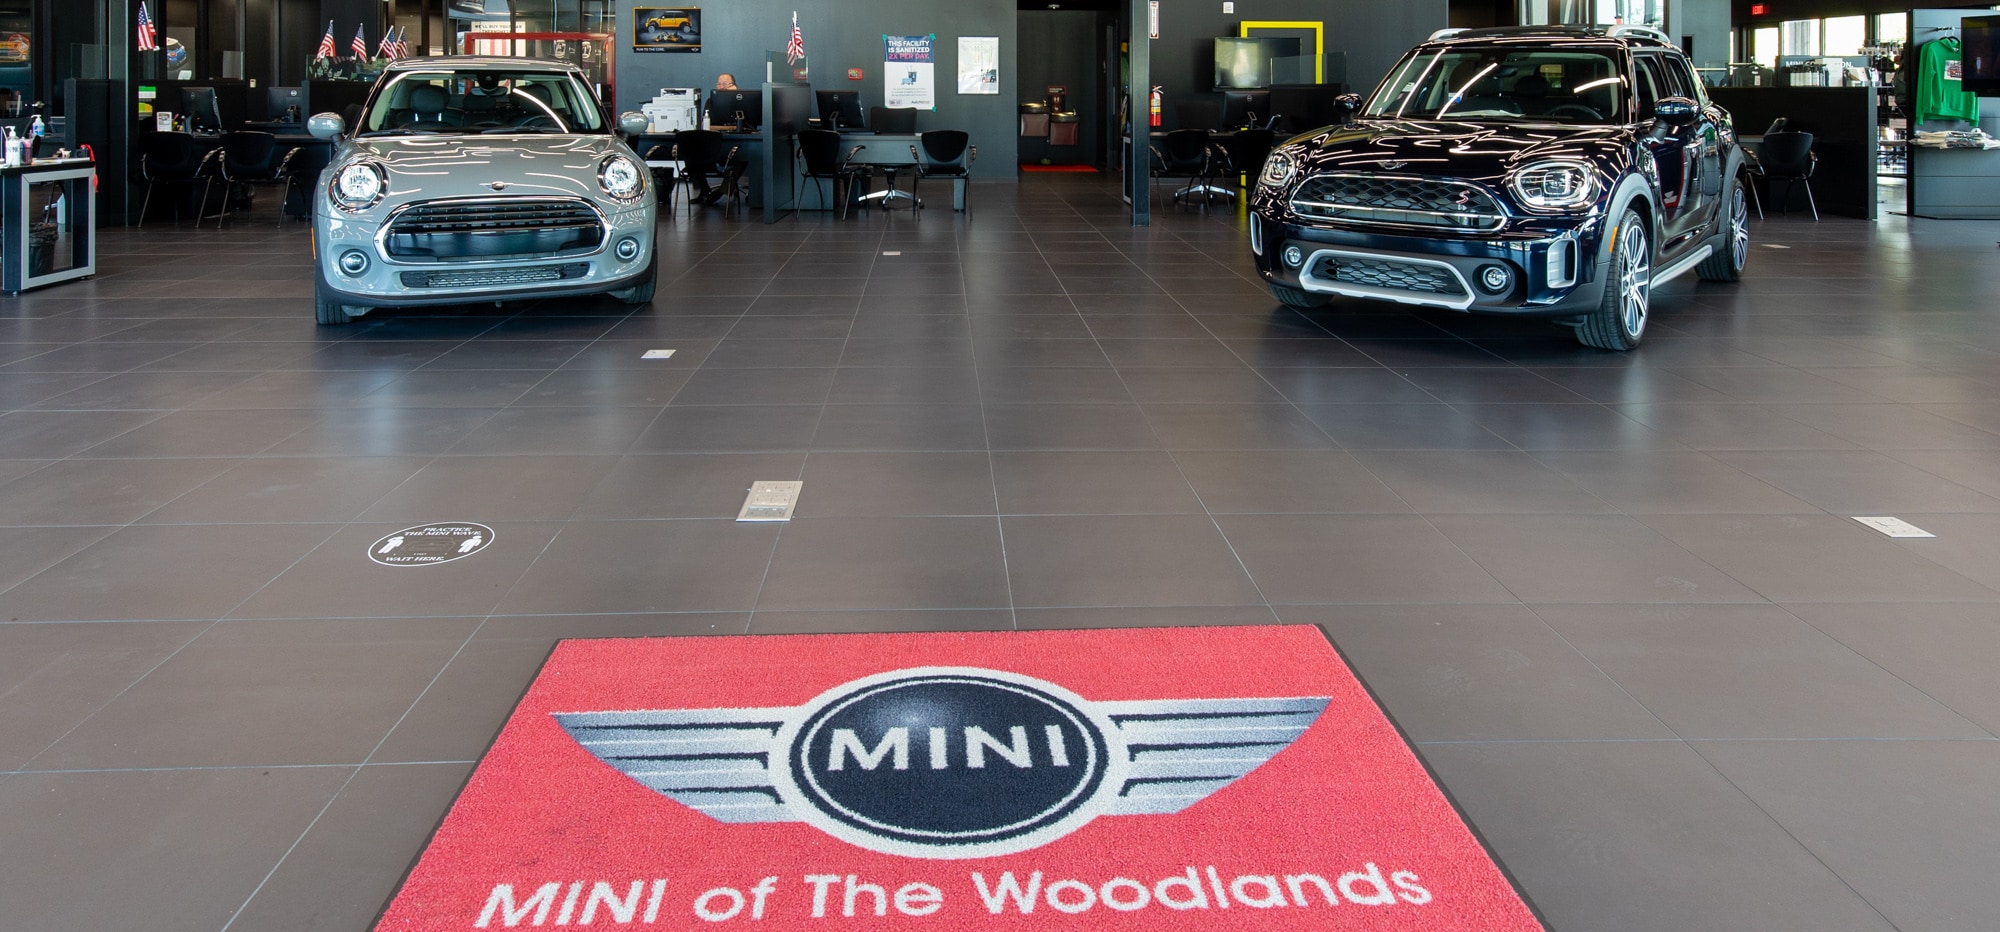 Interior view of MINI of the Woodlands with two MINI facing the camera